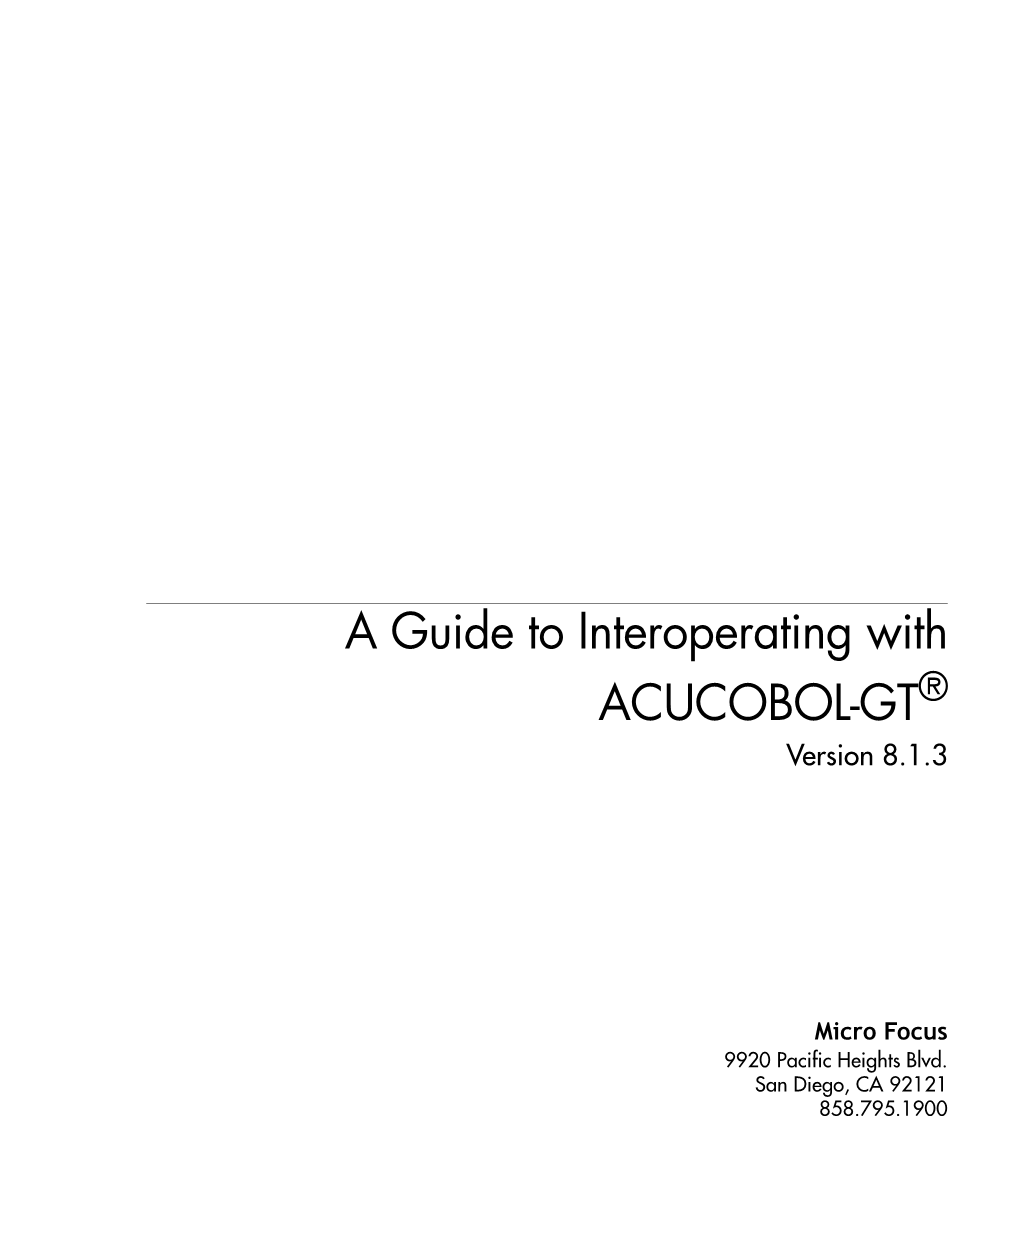 A Guide to Interoperating with ACUCOBOL-GT® Version 8.1.3